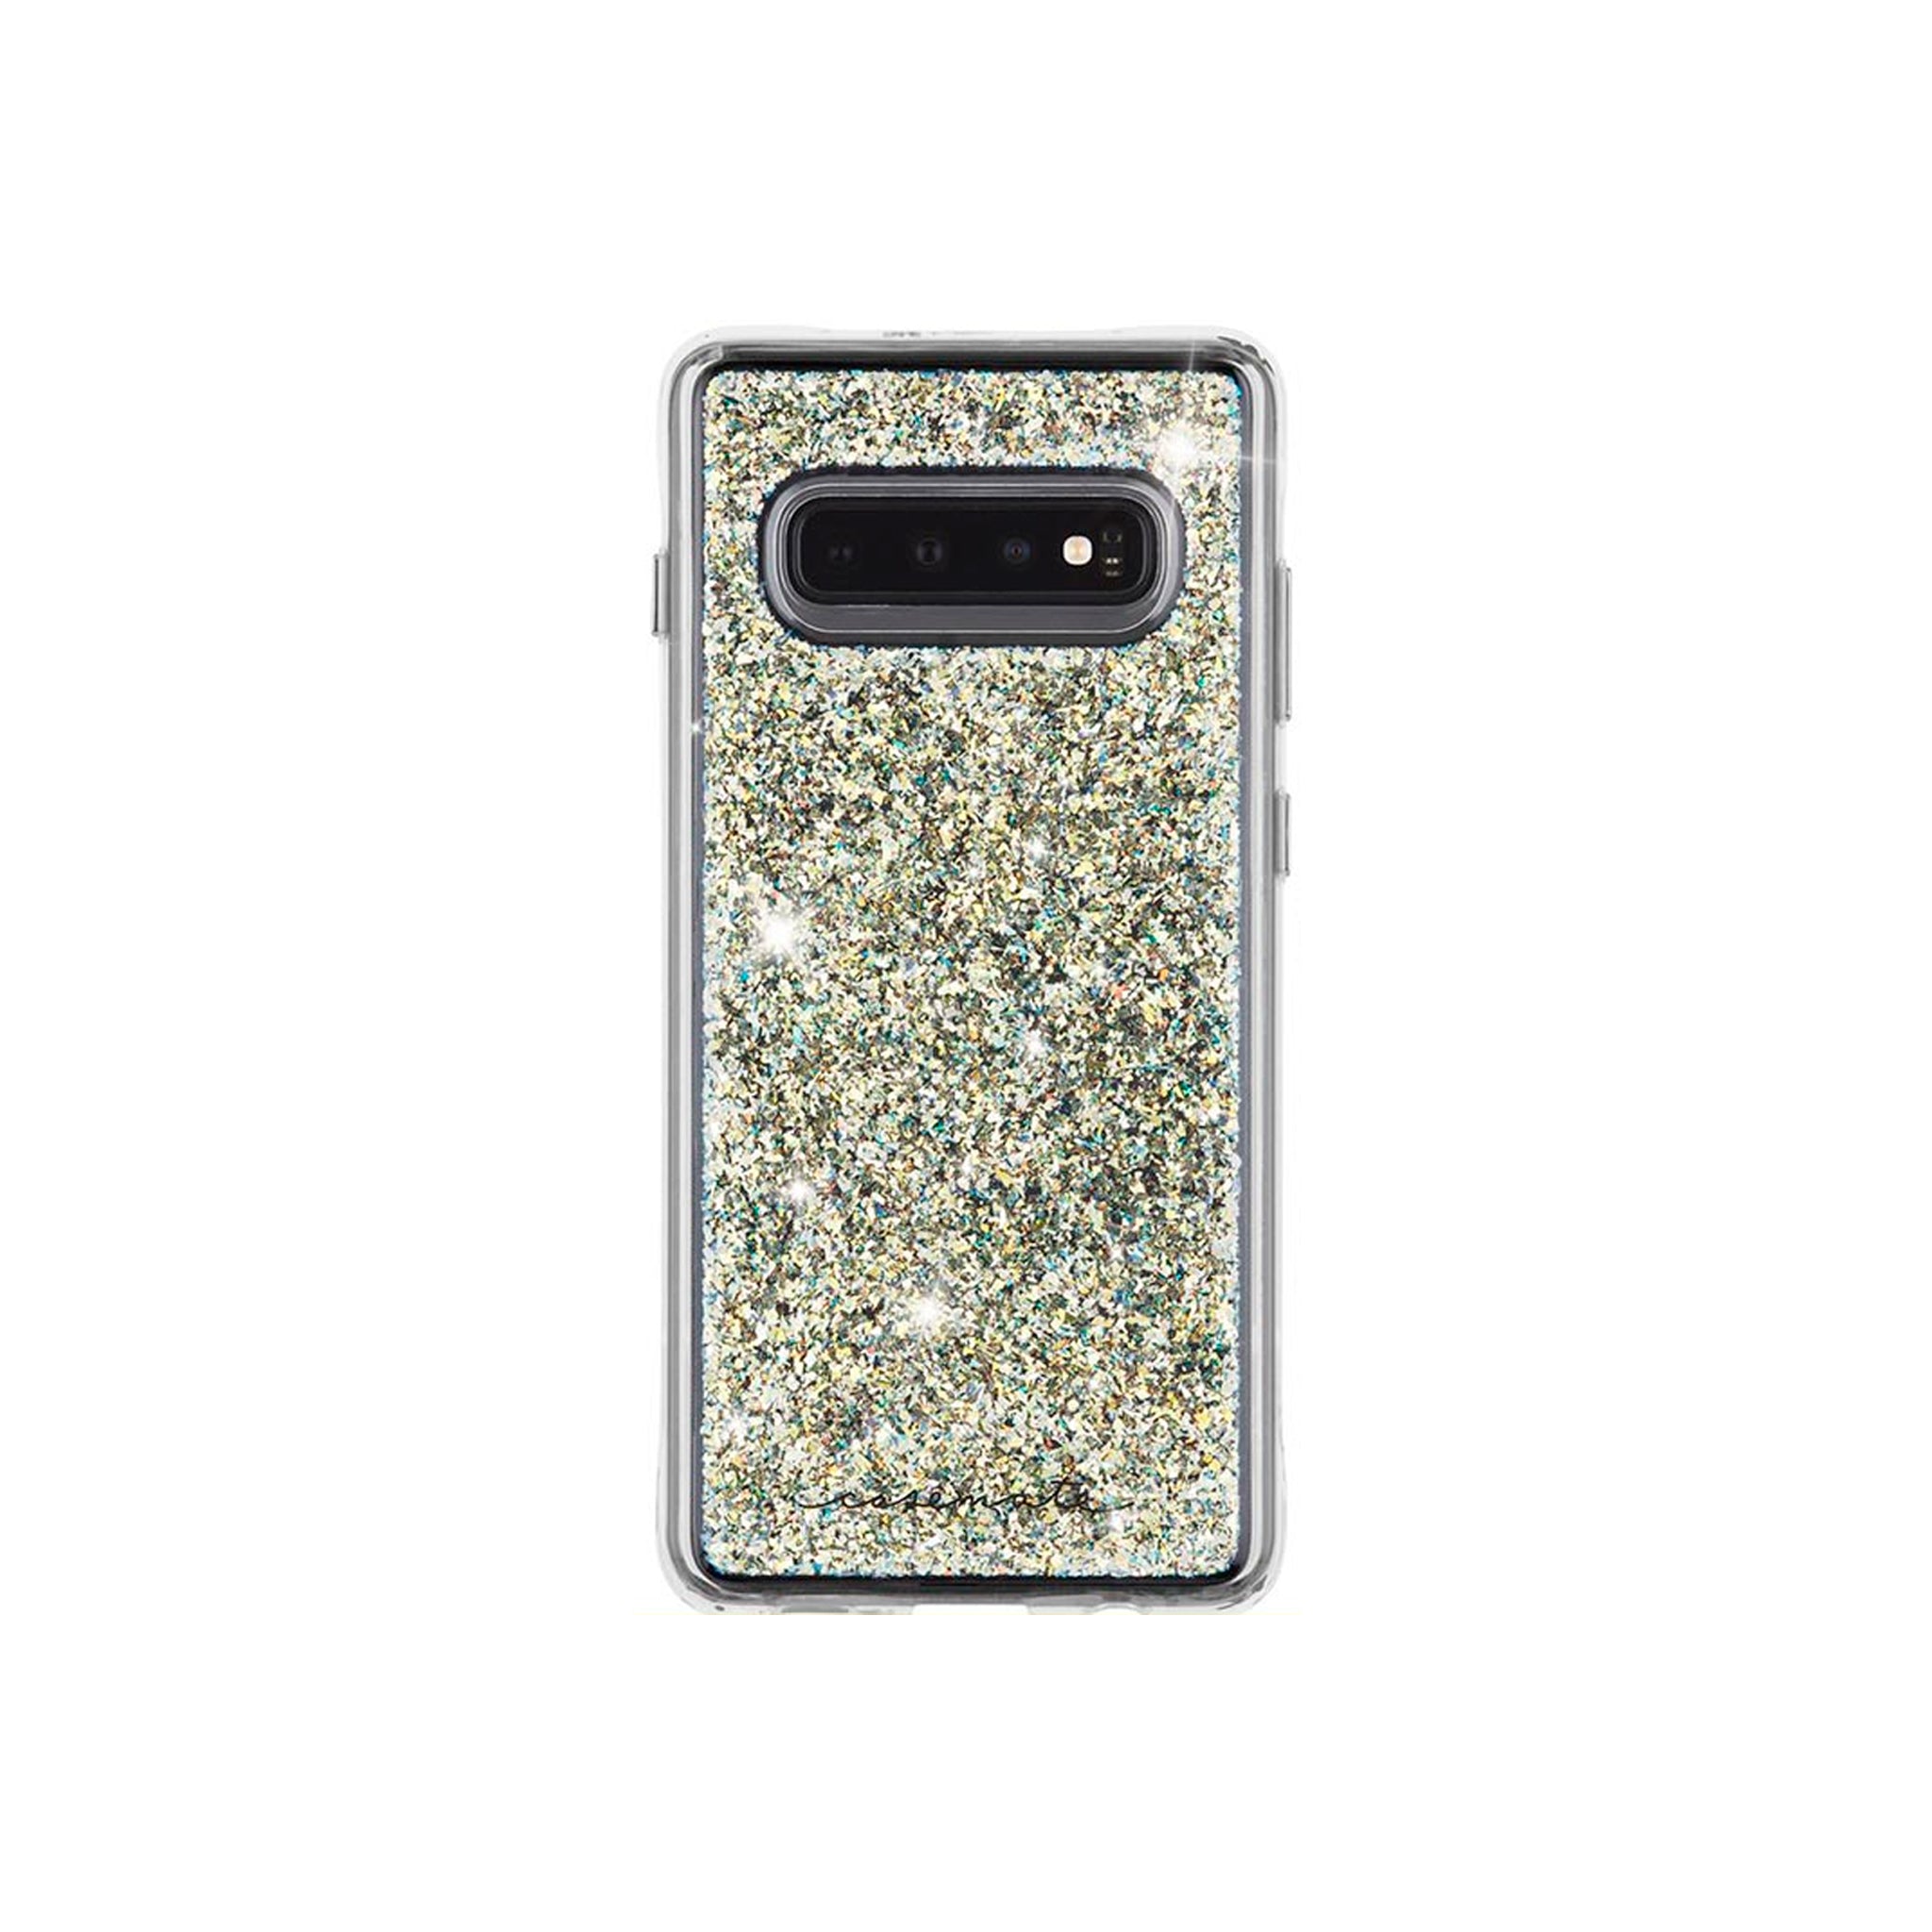 Case-mate - Twinkle Case For Samsung Galaxy S10 Plus - Stardust